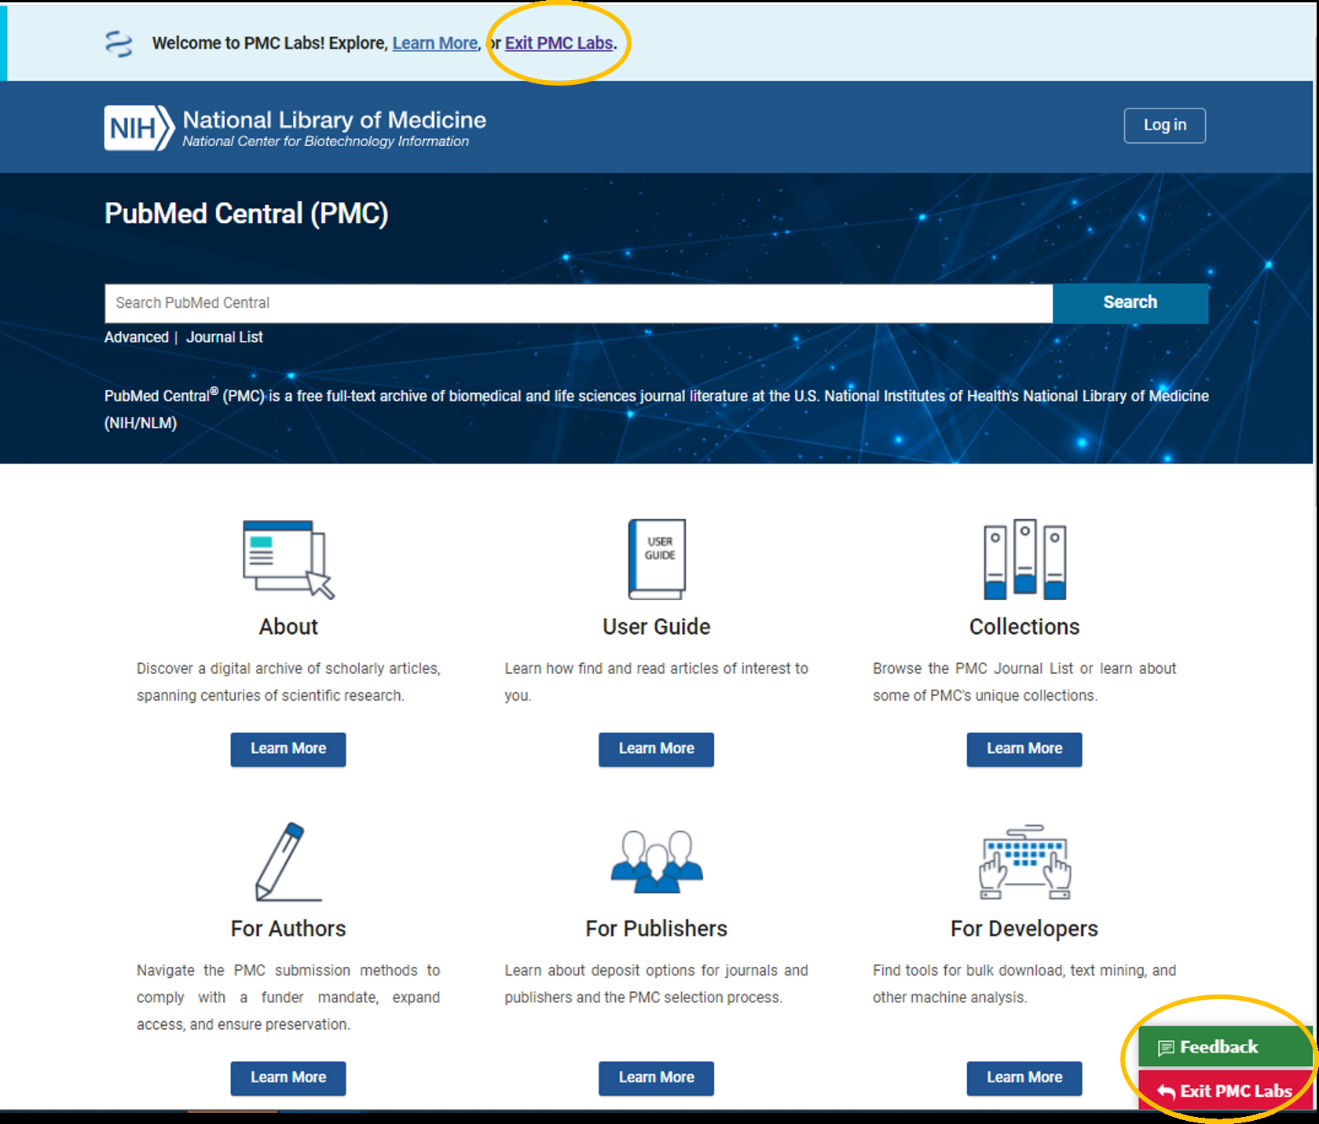 Screenshot of PMC Labs Homepage highlighting how to return exit PMC Labs